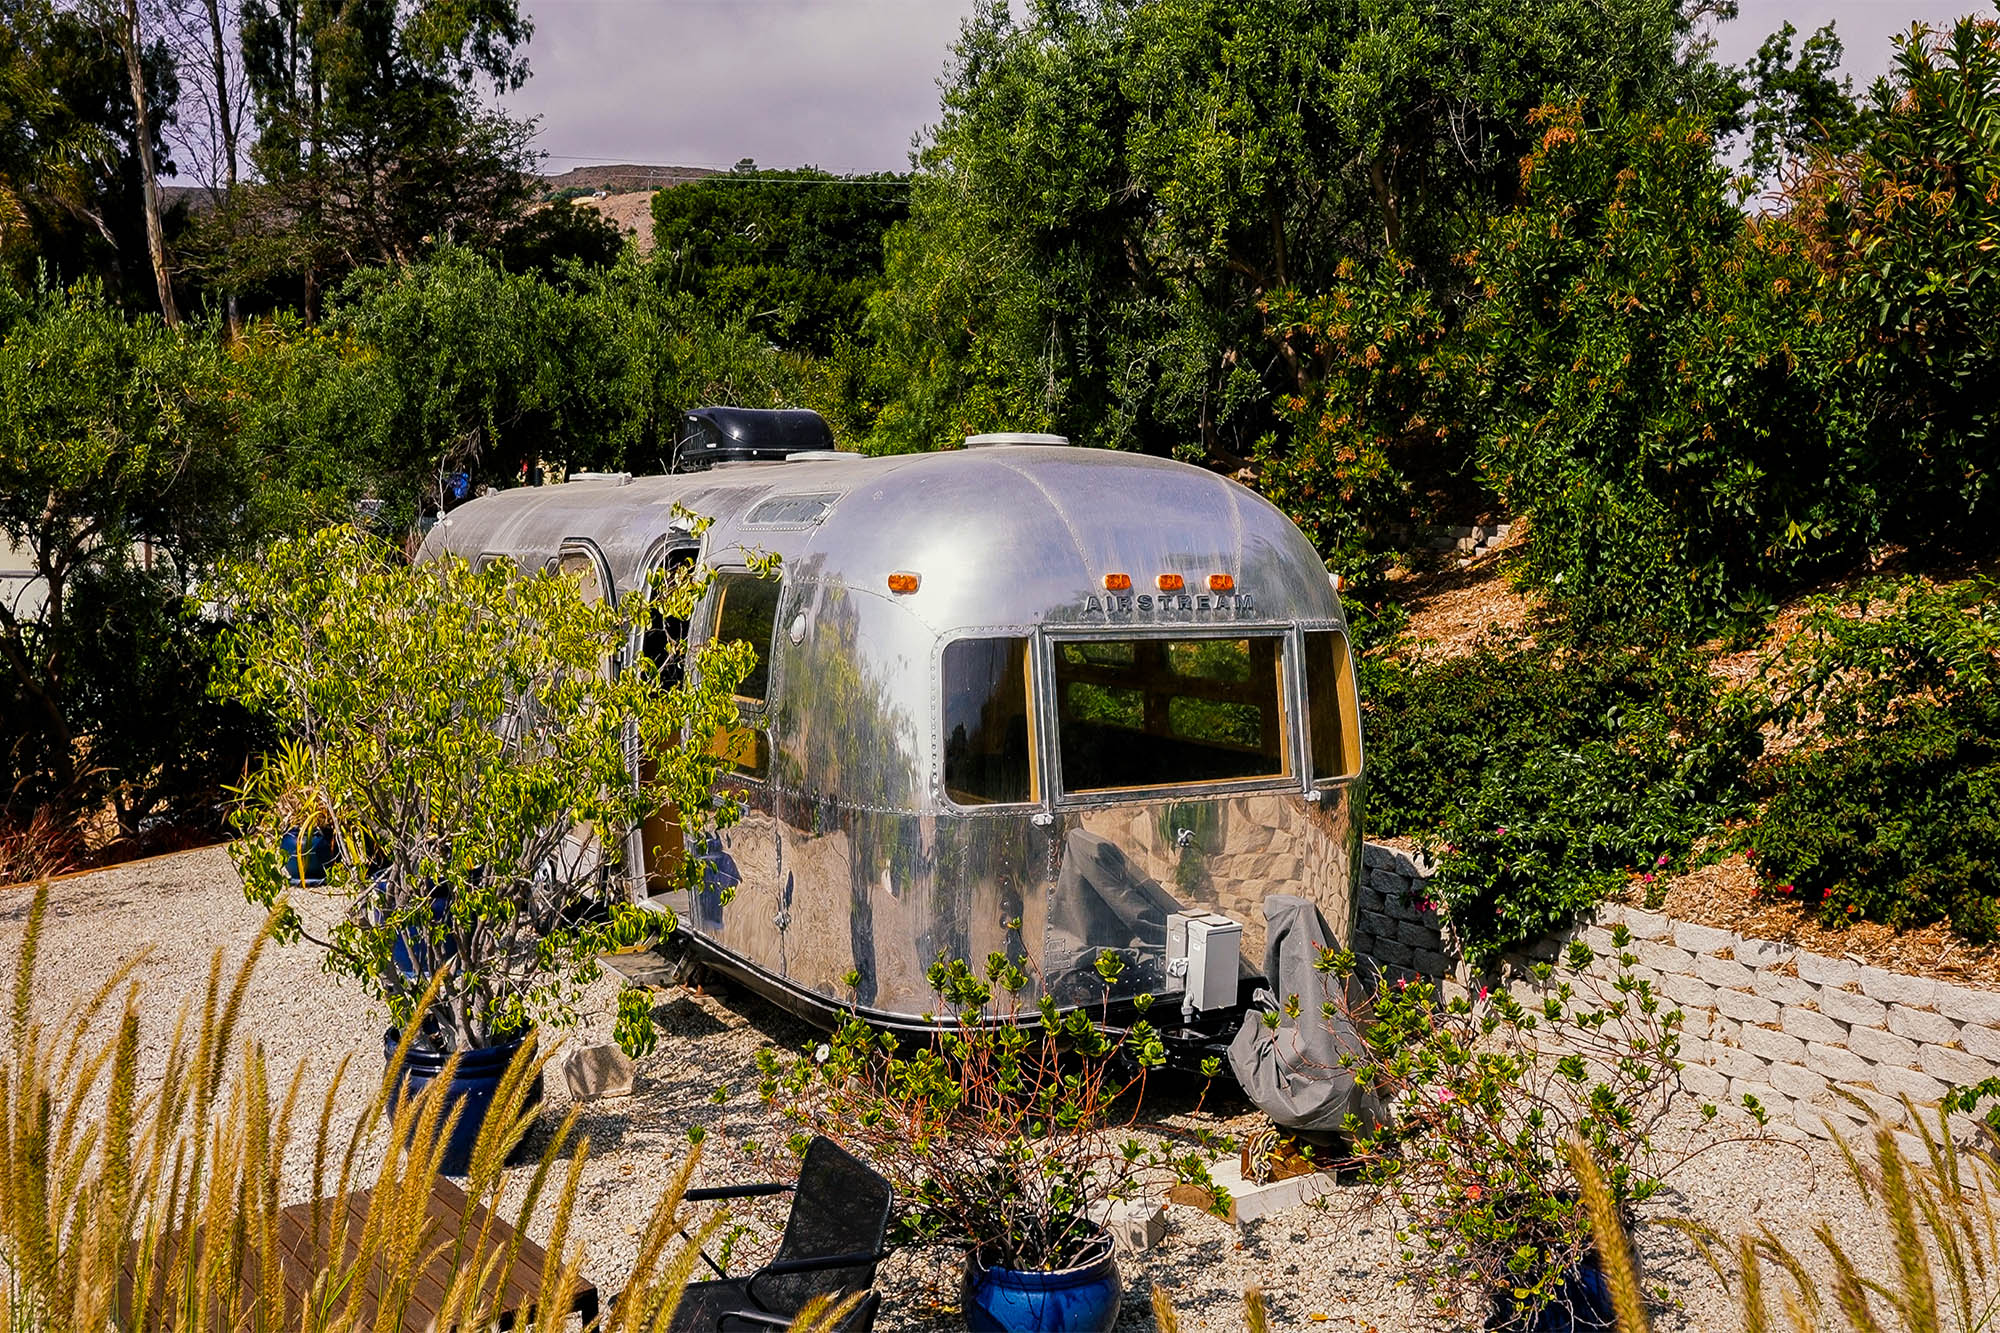 An airstream sits tucked away on the property.